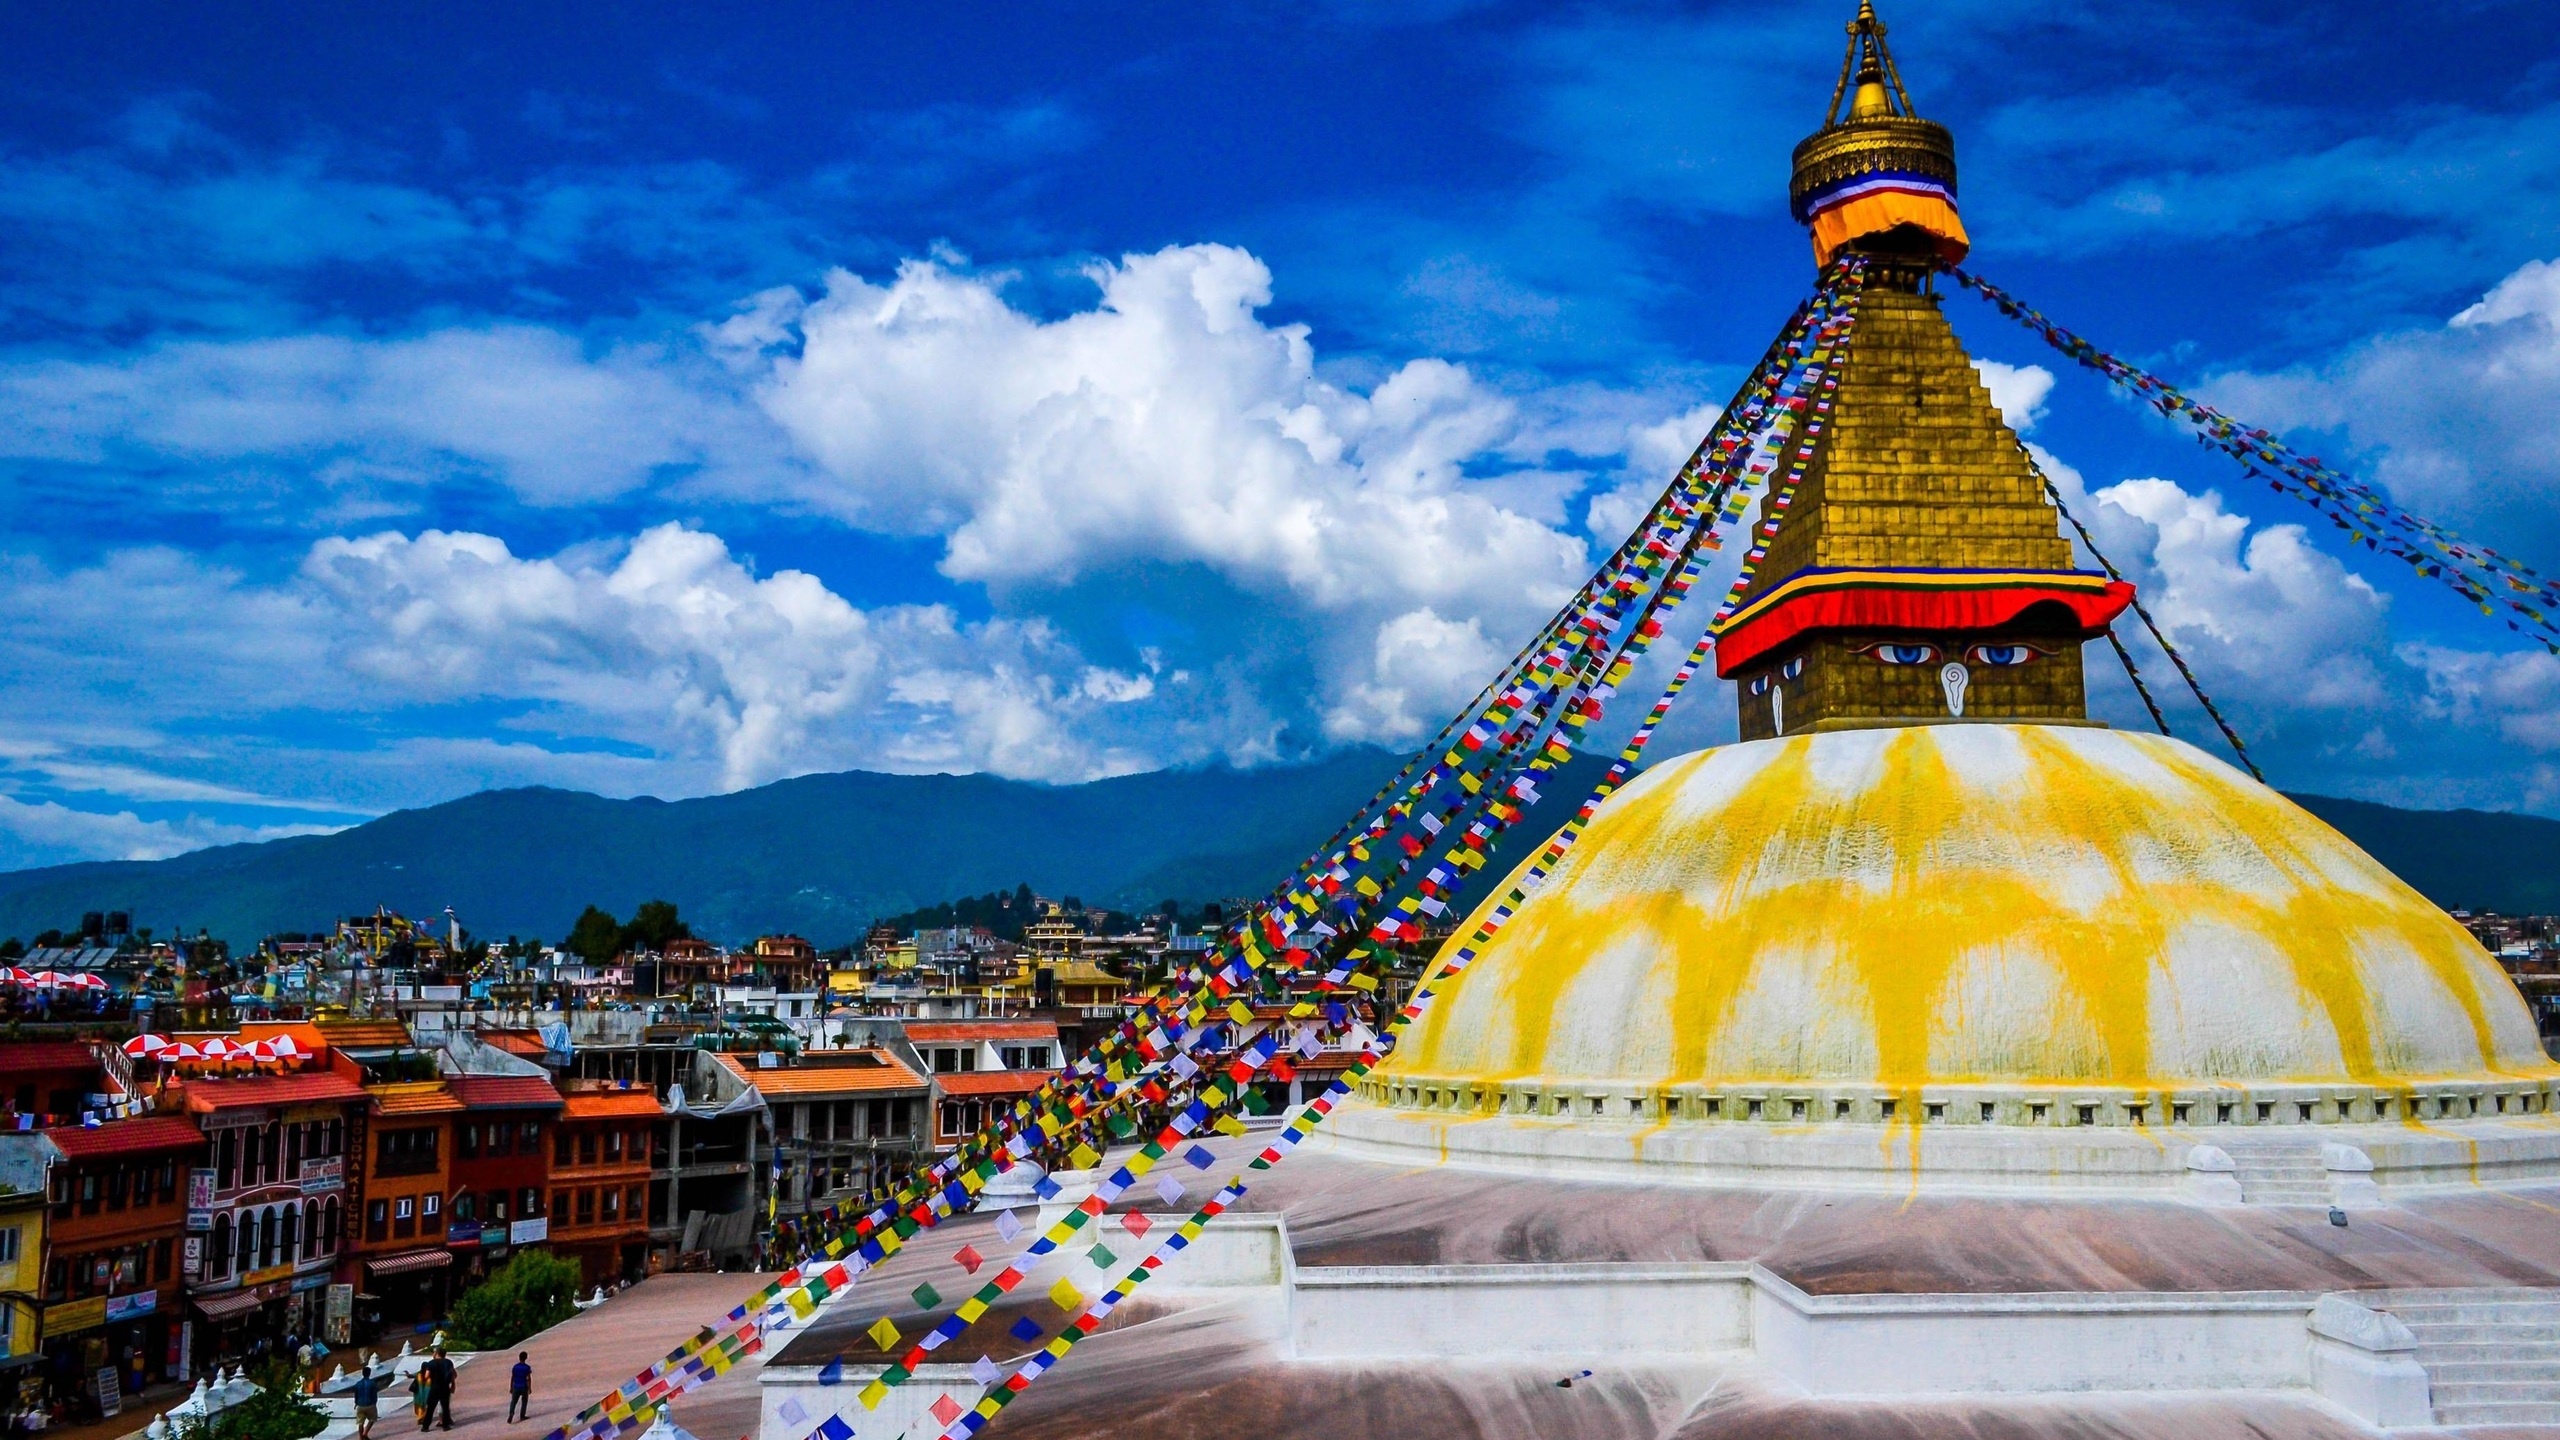 Nepal wallpaper, Michelle Anderson's collection, Stunning visuals, High-quality resolution, 2560x1440 HD Desktop